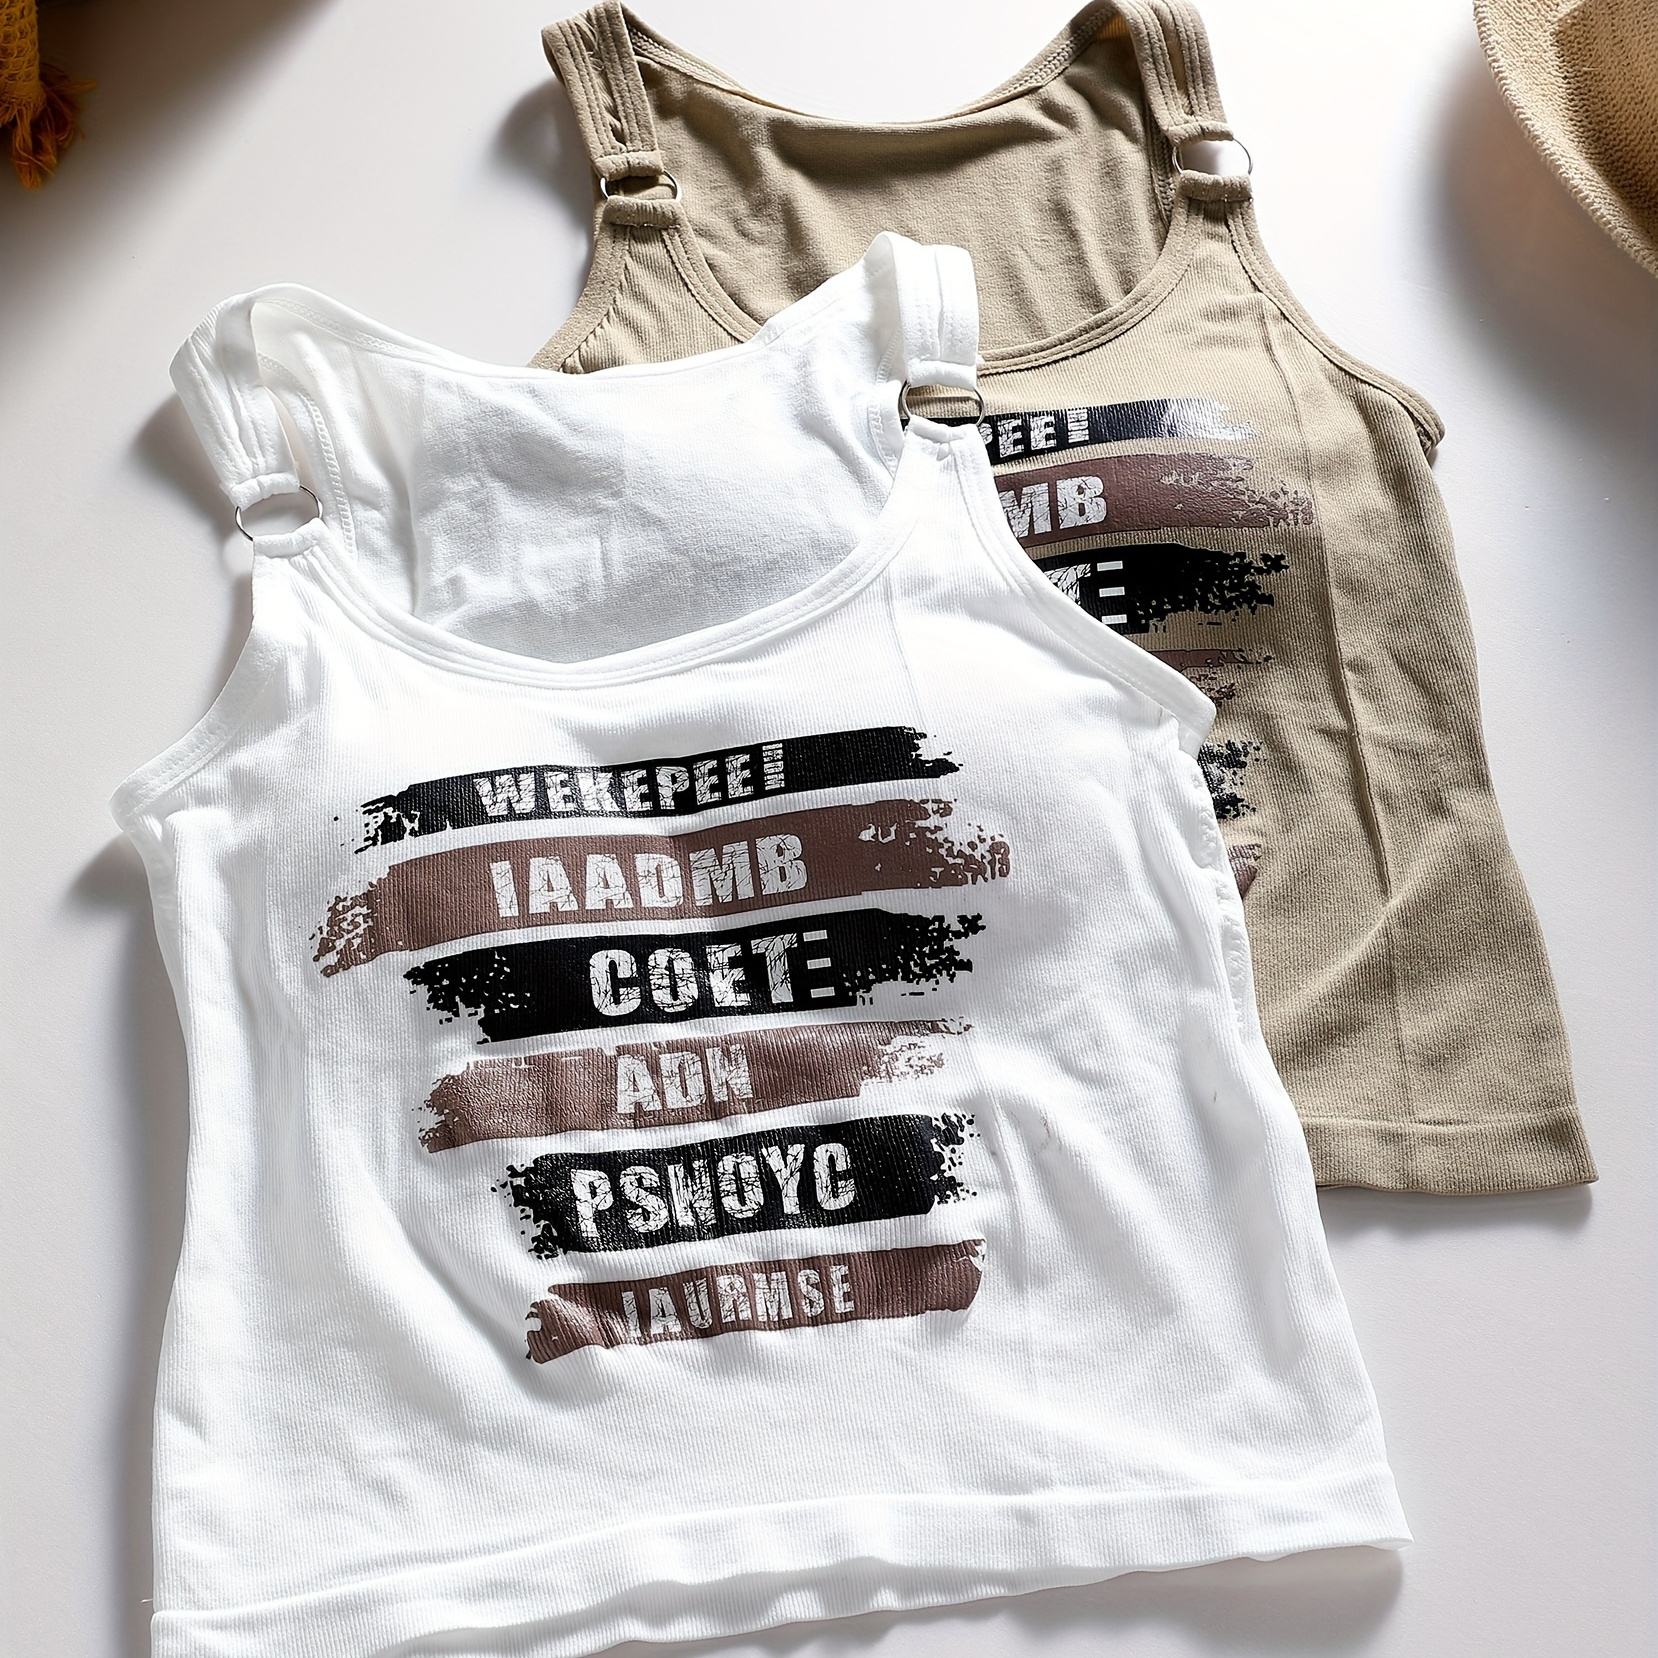 

Girls' 2pcs/set Slim Fit Letters Print Undershirt For Summer, Girls' Clothing, Suitable For 12y-14y